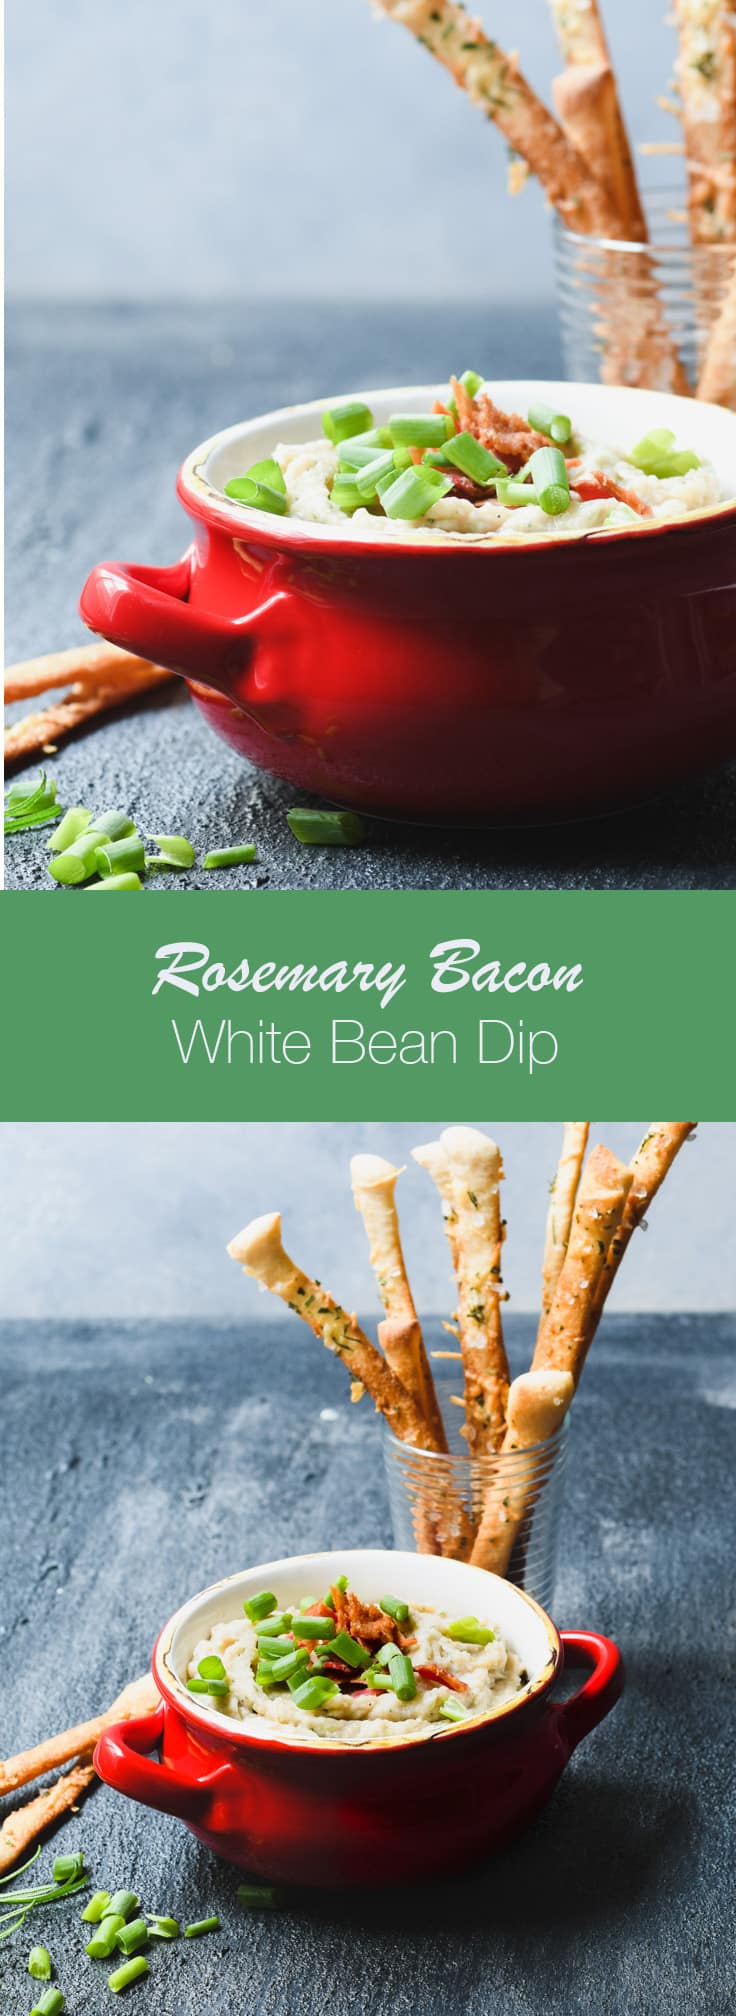 This Rosemary White Bean Dip is topped with Bacon and served with parmesan breadsticks for the ultimate party appetizer! 